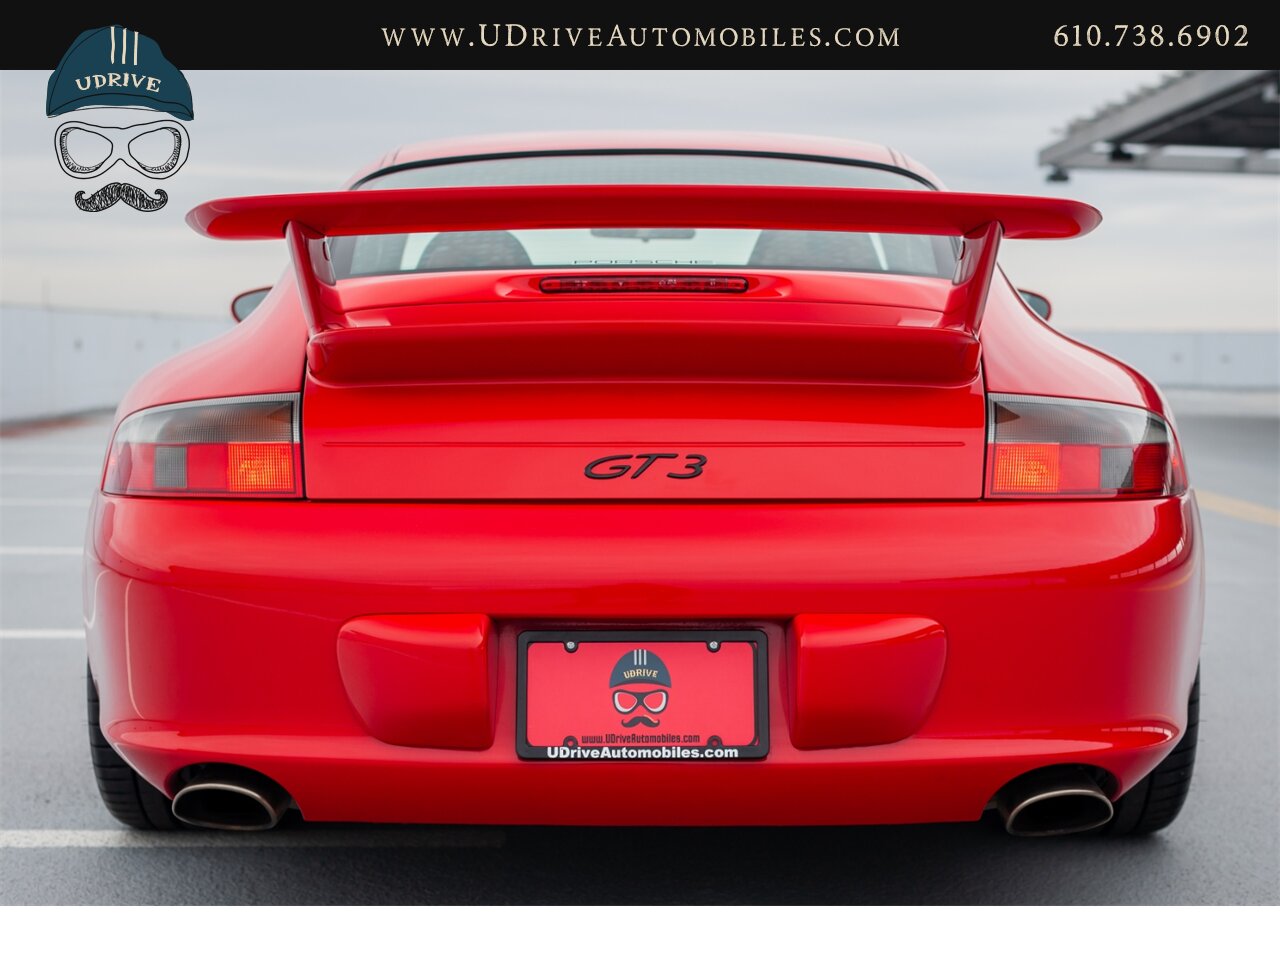 2004 Porsche 911 996 GT3 Guards Red Sport Seats Painted Hardbacks  Painted Center Console 18k Miles - Photo 24 - West Chester, PA 19382